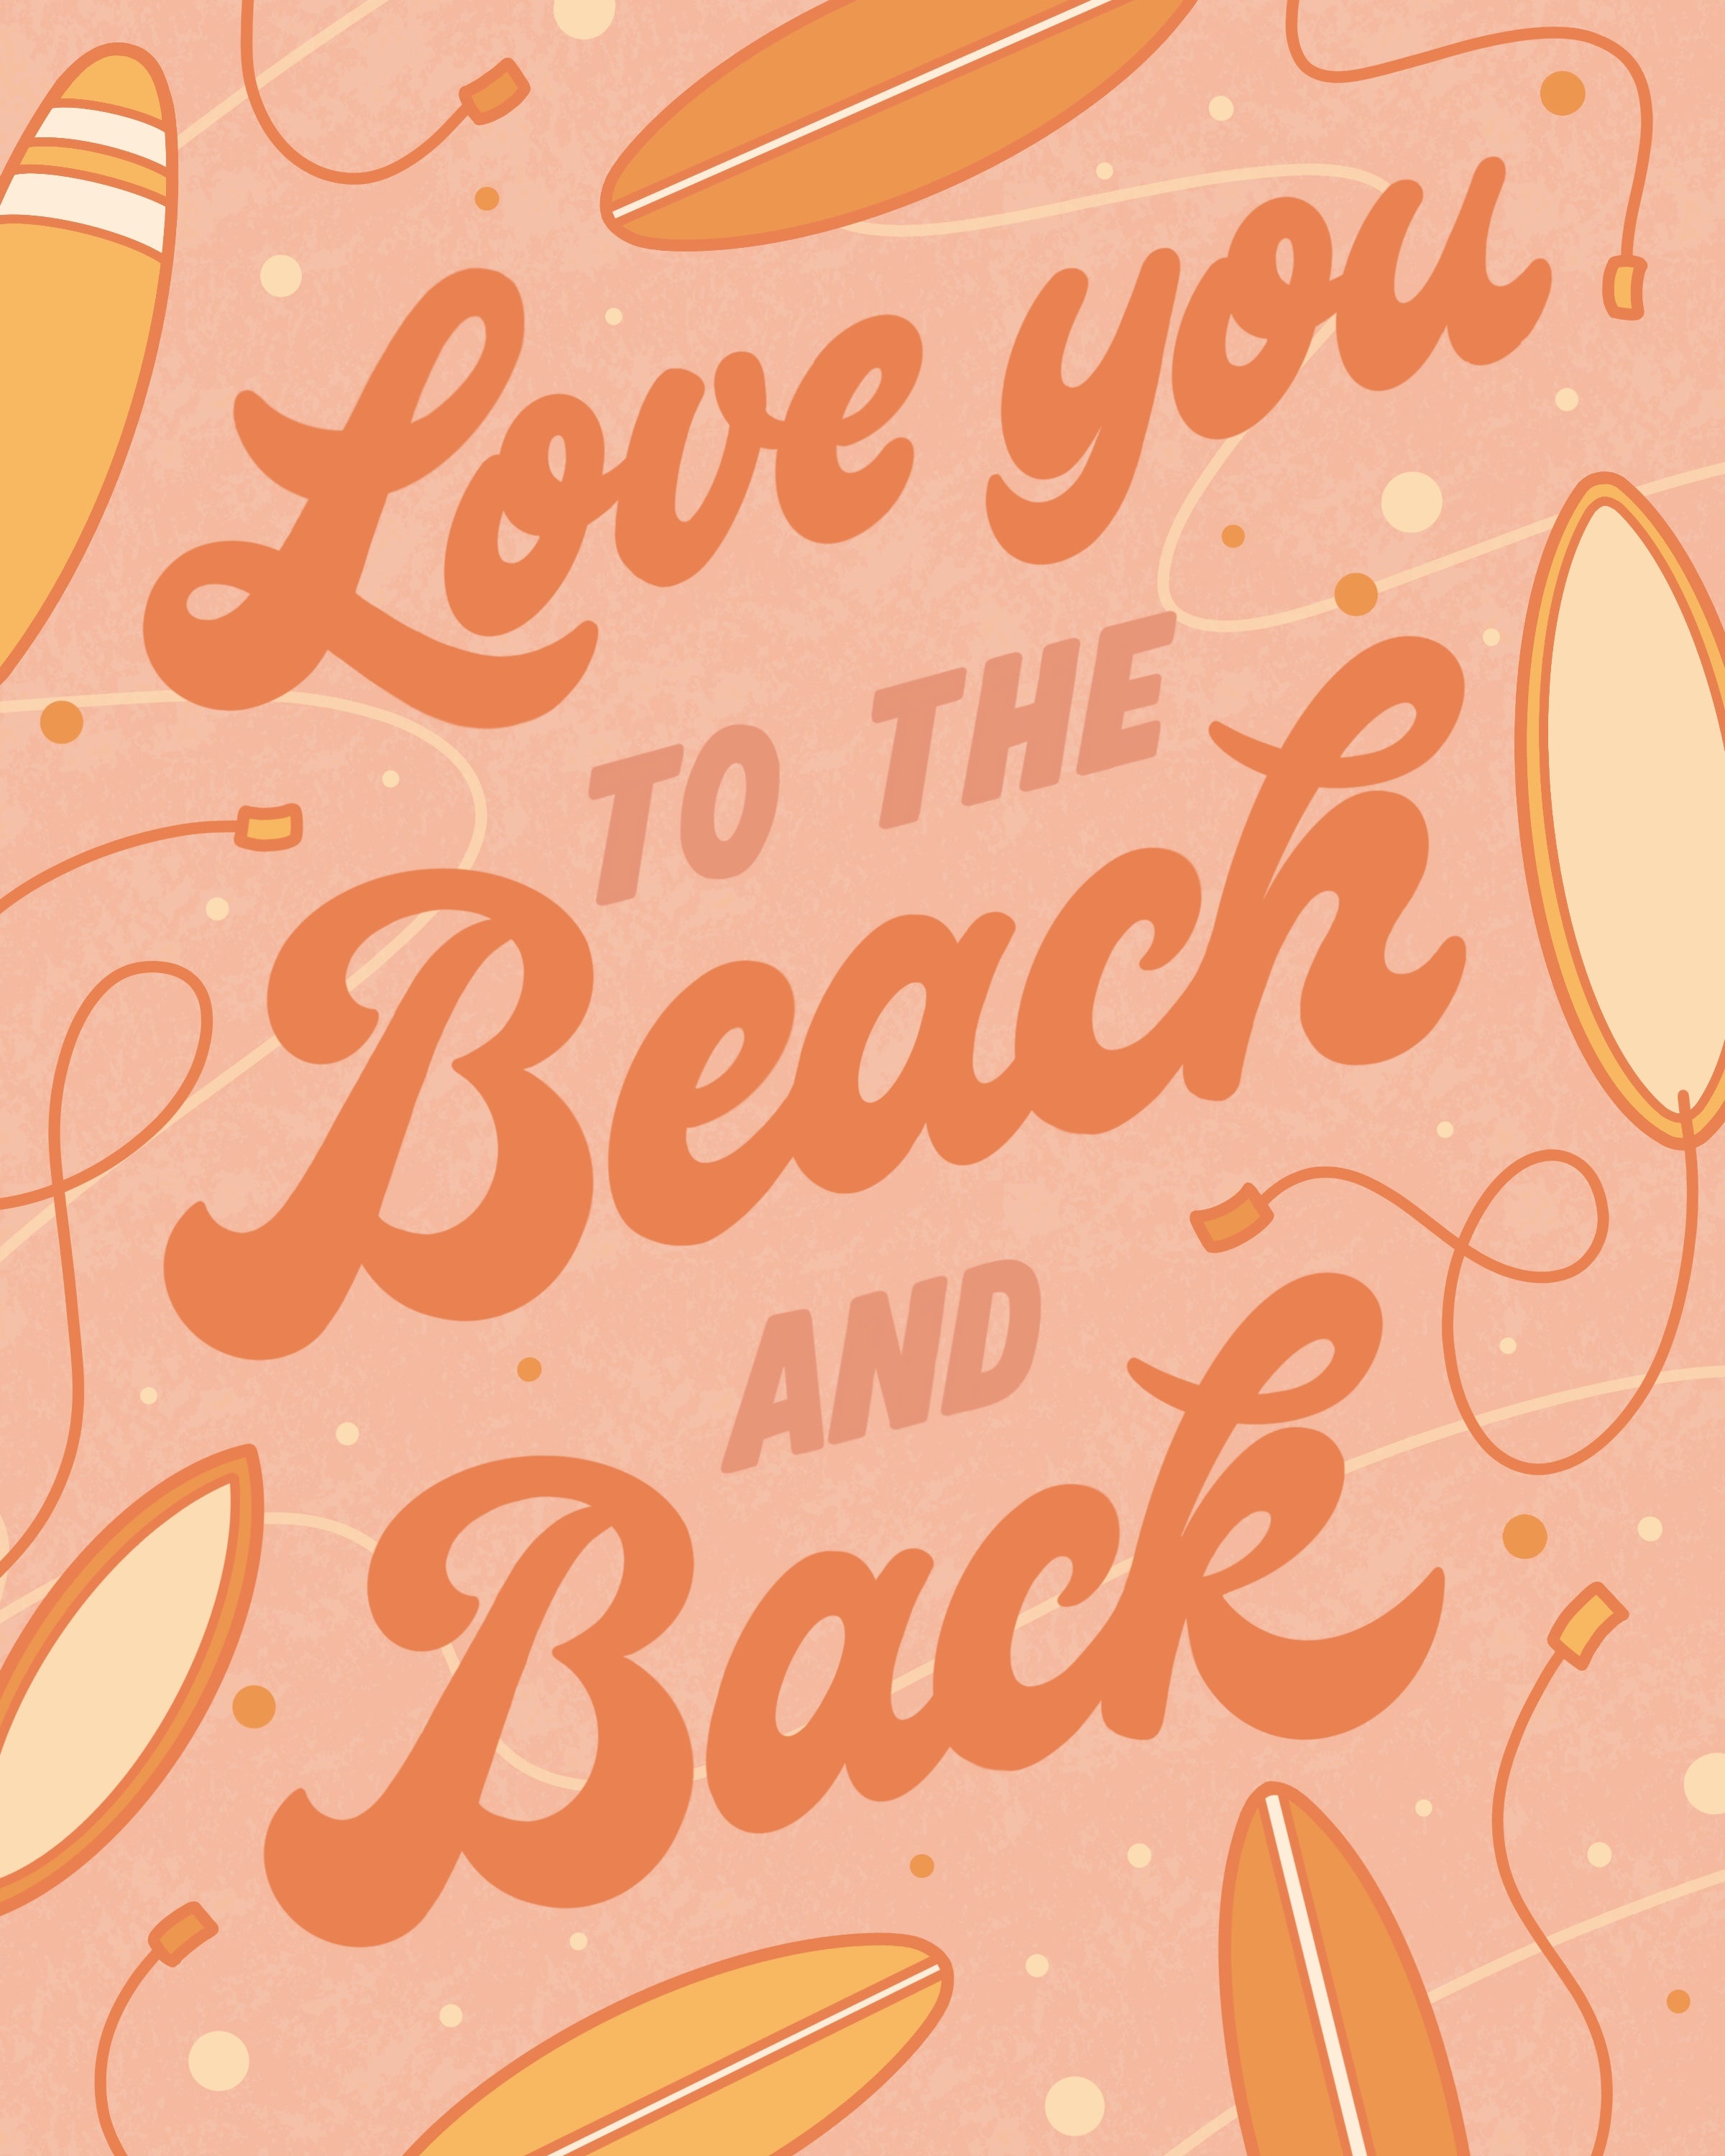 Beach and Surf Lettering Illustration